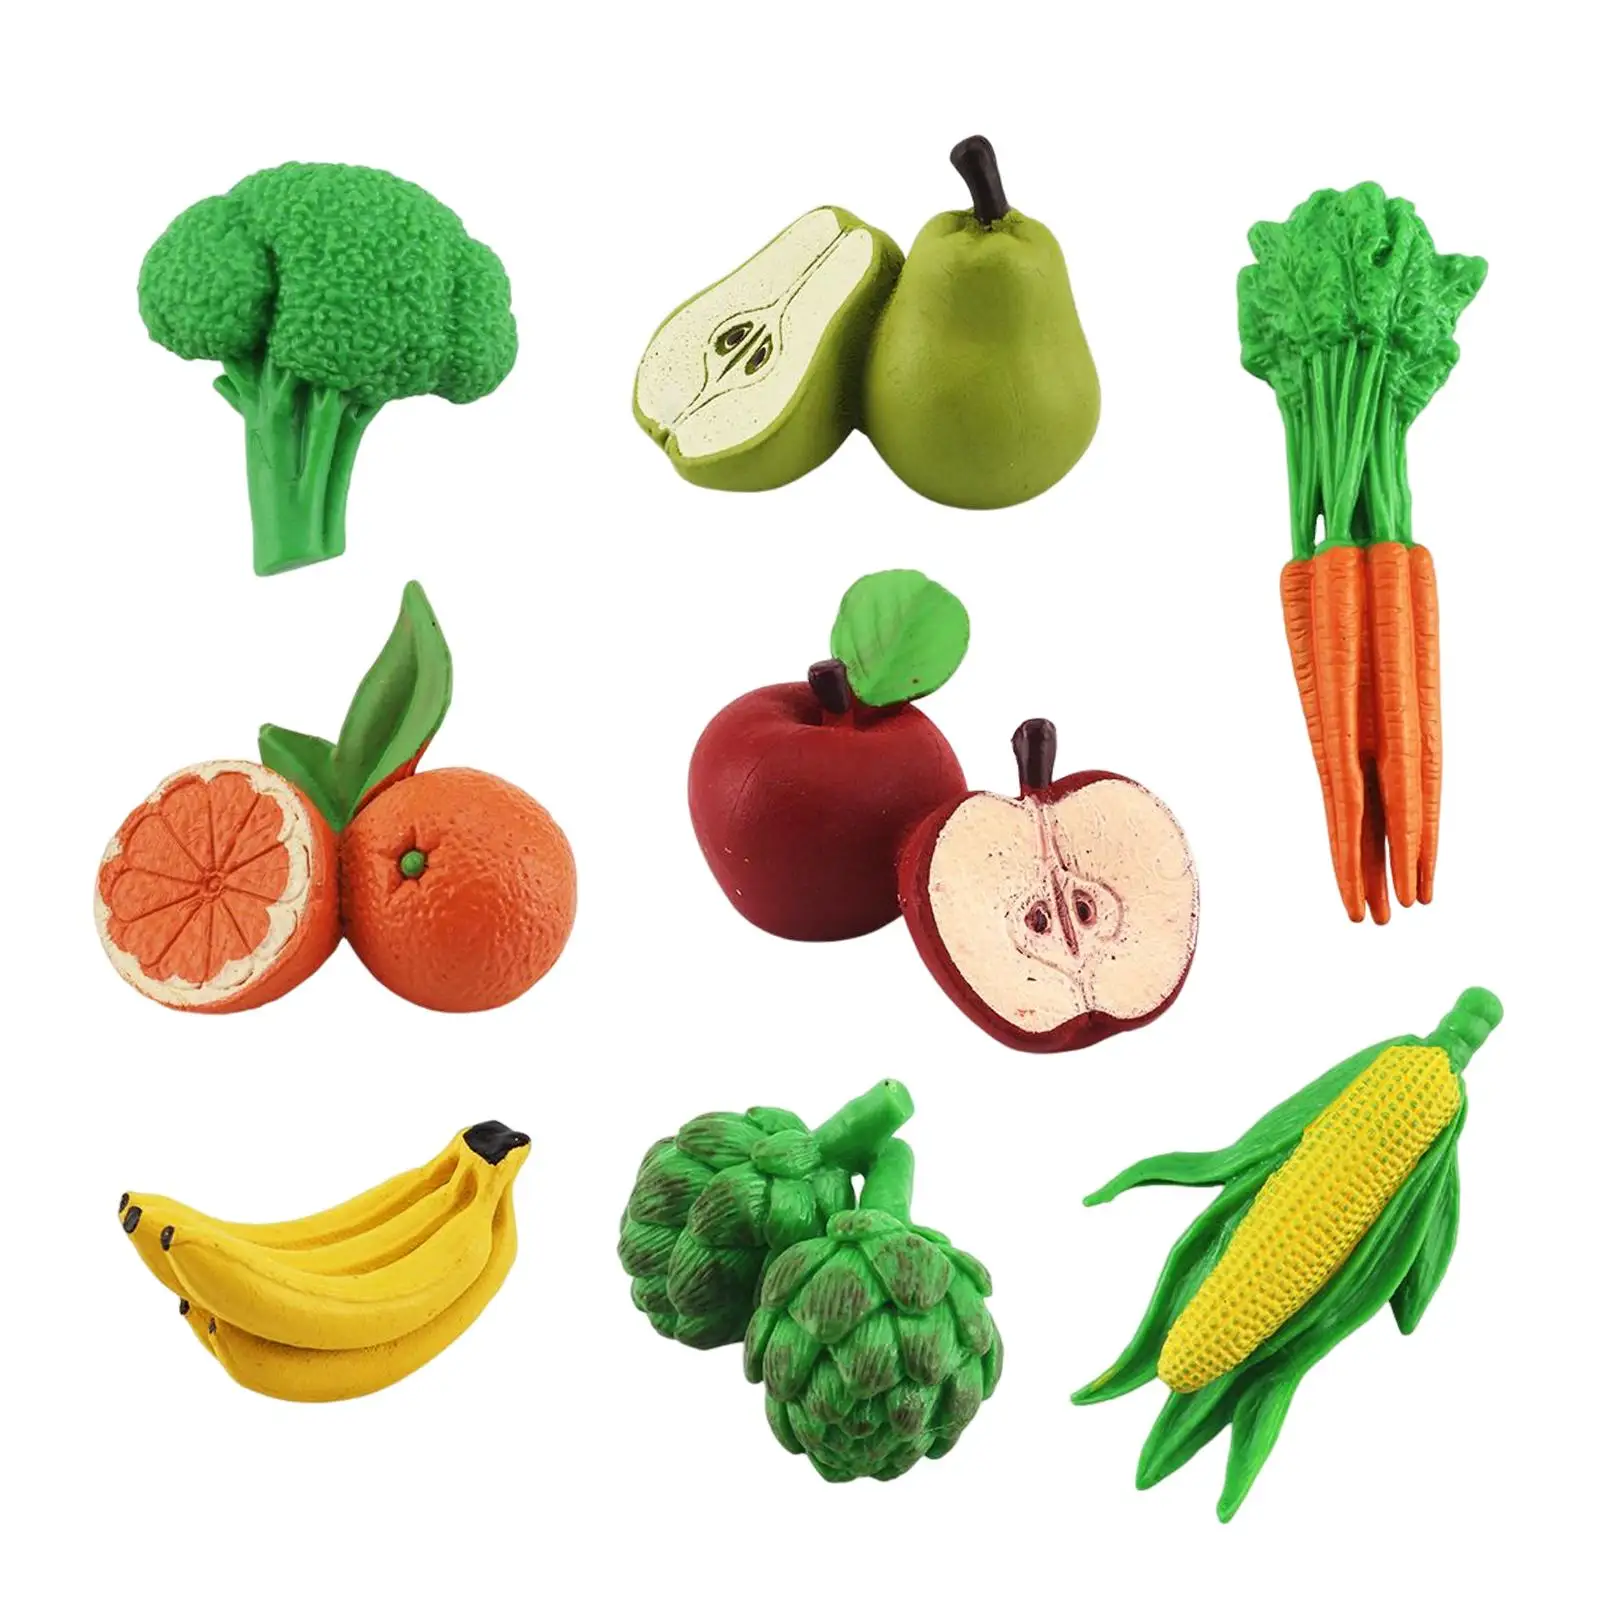 Simulation Vegetables Fruits Decoration Photography Props Crafts for Party Home Living Room Decoration Ornament